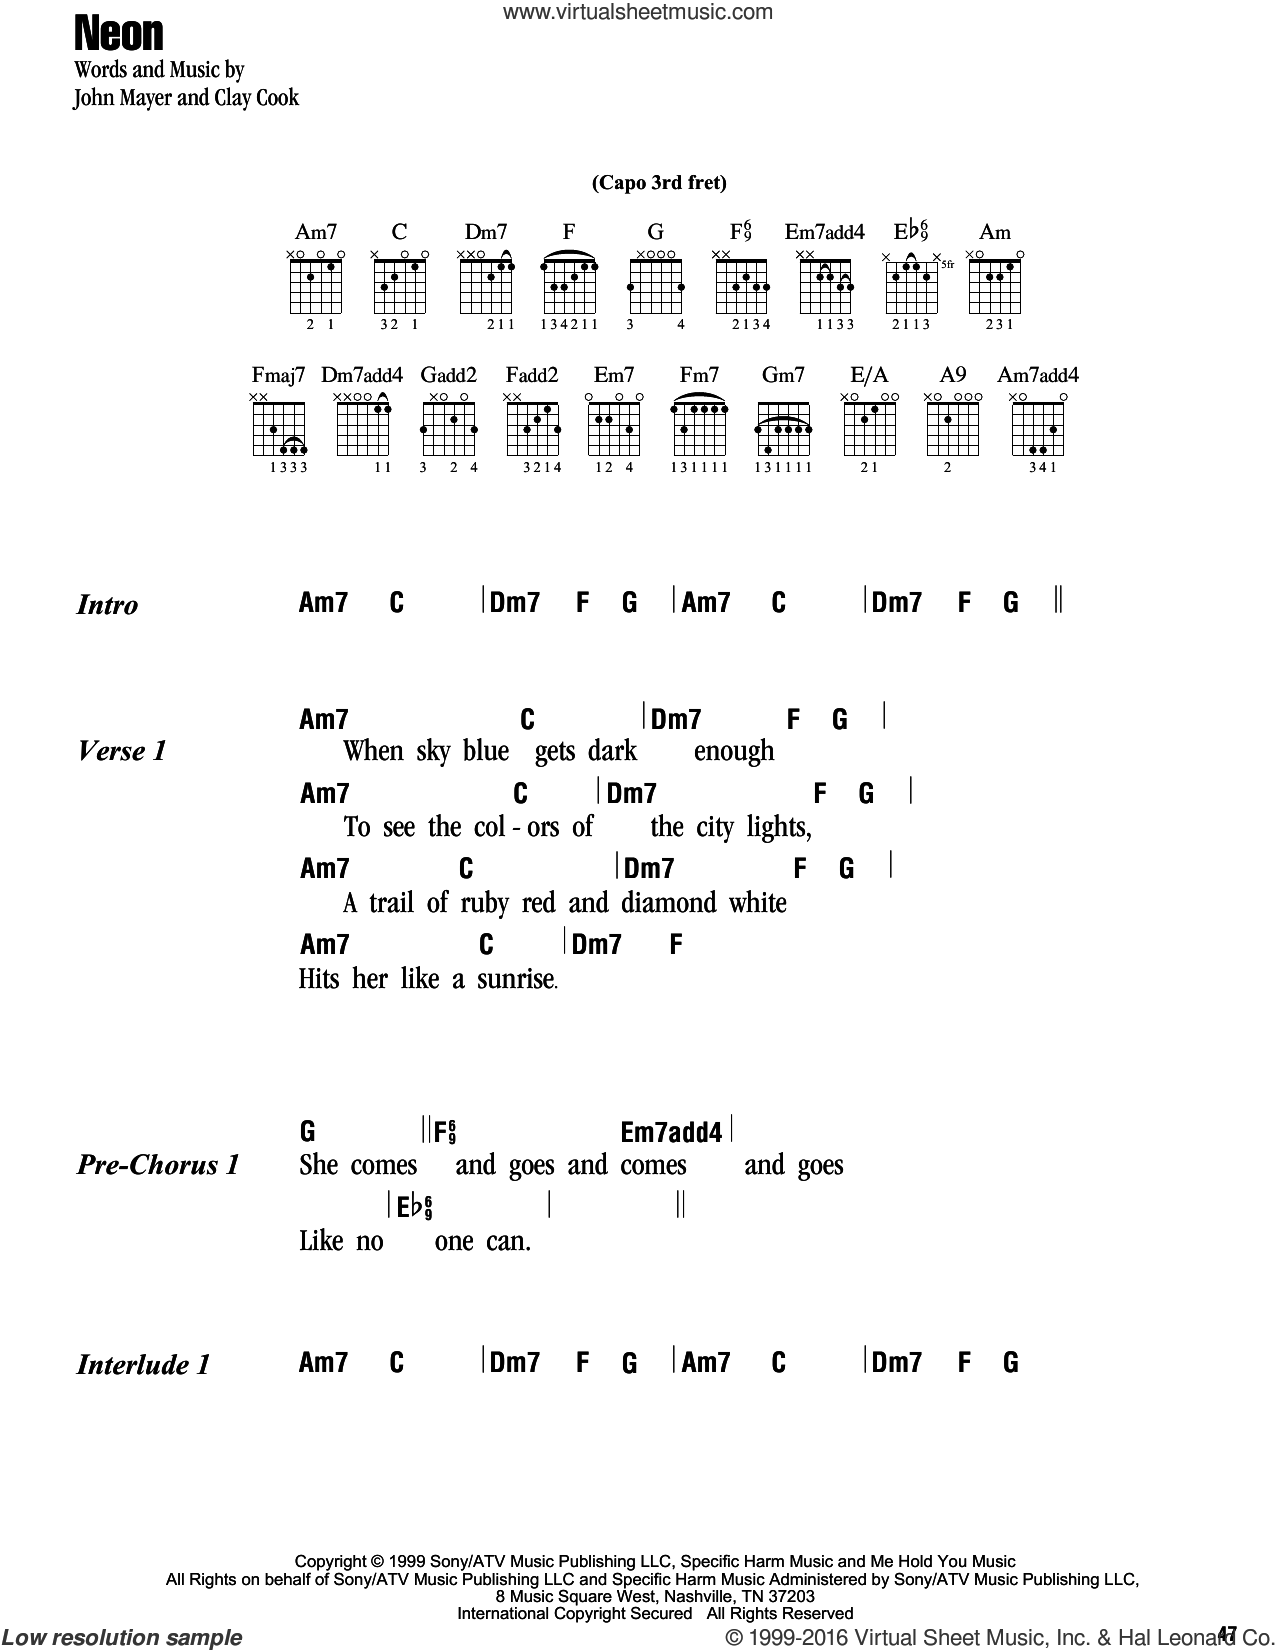 Download & Print Neon for guitar (chords) by John Mayer. 